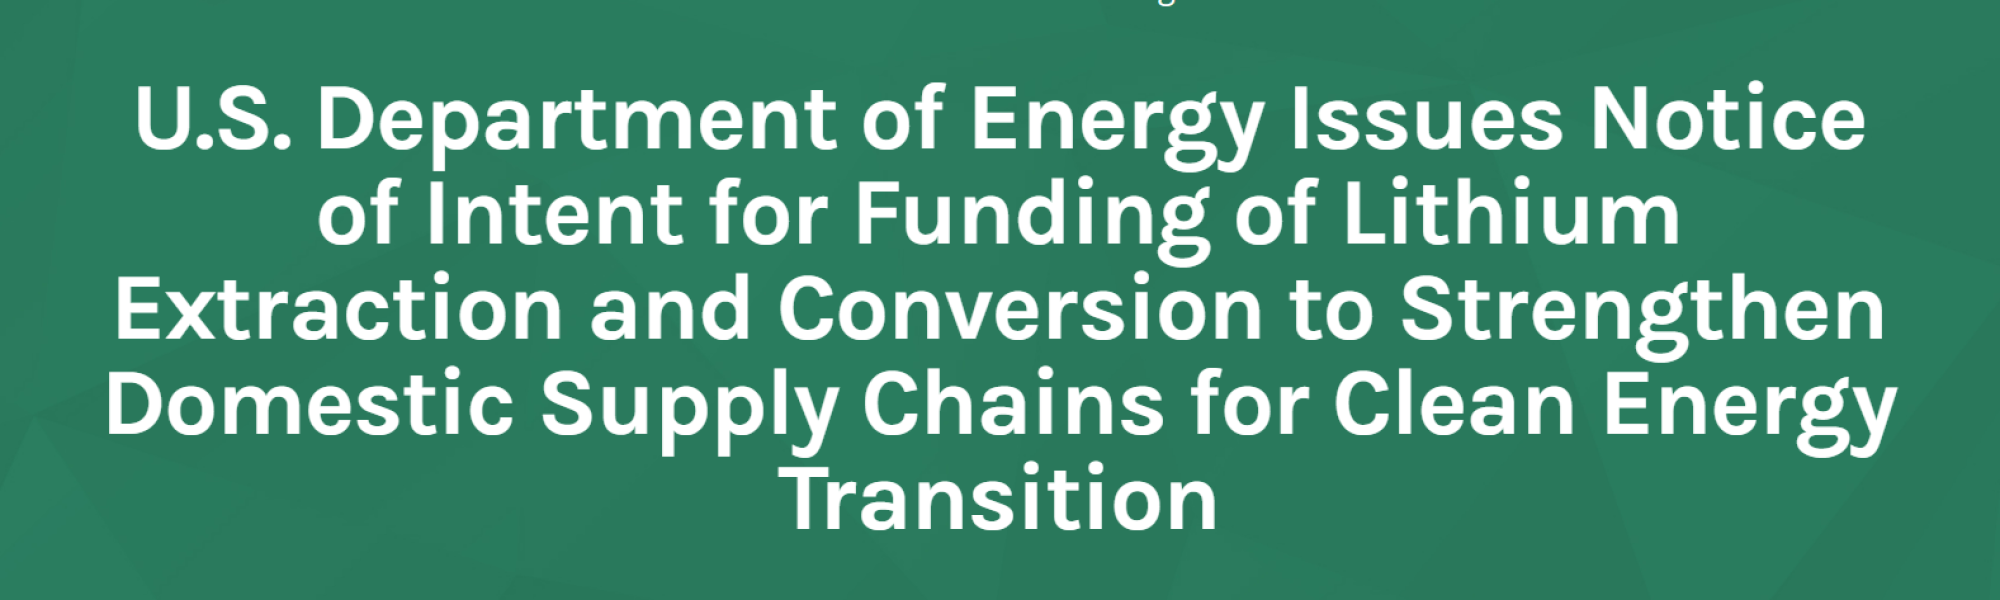 US Department of Energy Issues Notice of Intent for Funding of Lithium Extraction and Conversion to Strengthen Domestic Supply Chains for Clean Energy Transition